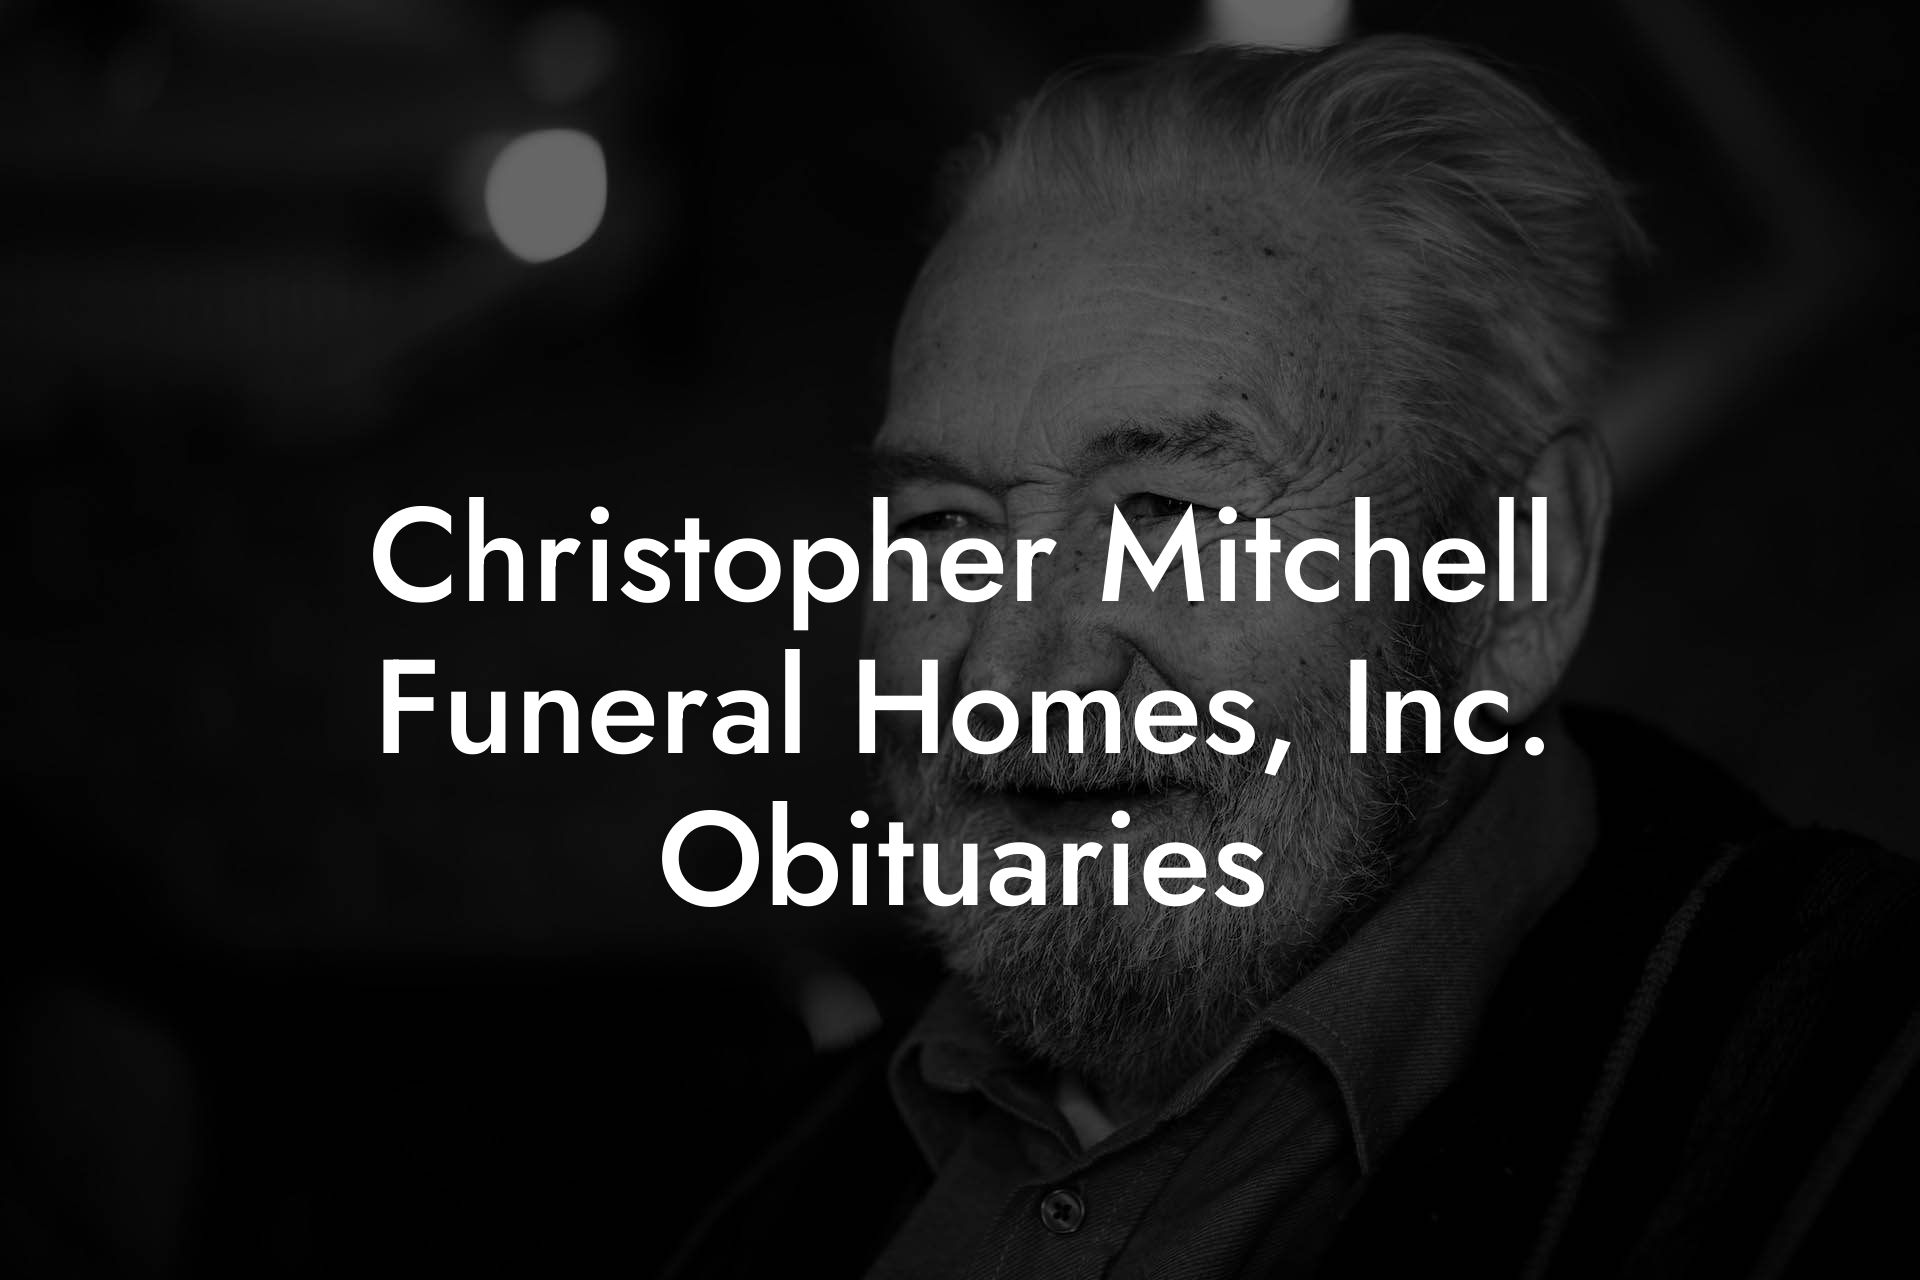 Christopher Mitchell Funeral Homes, Inc. Obituaries